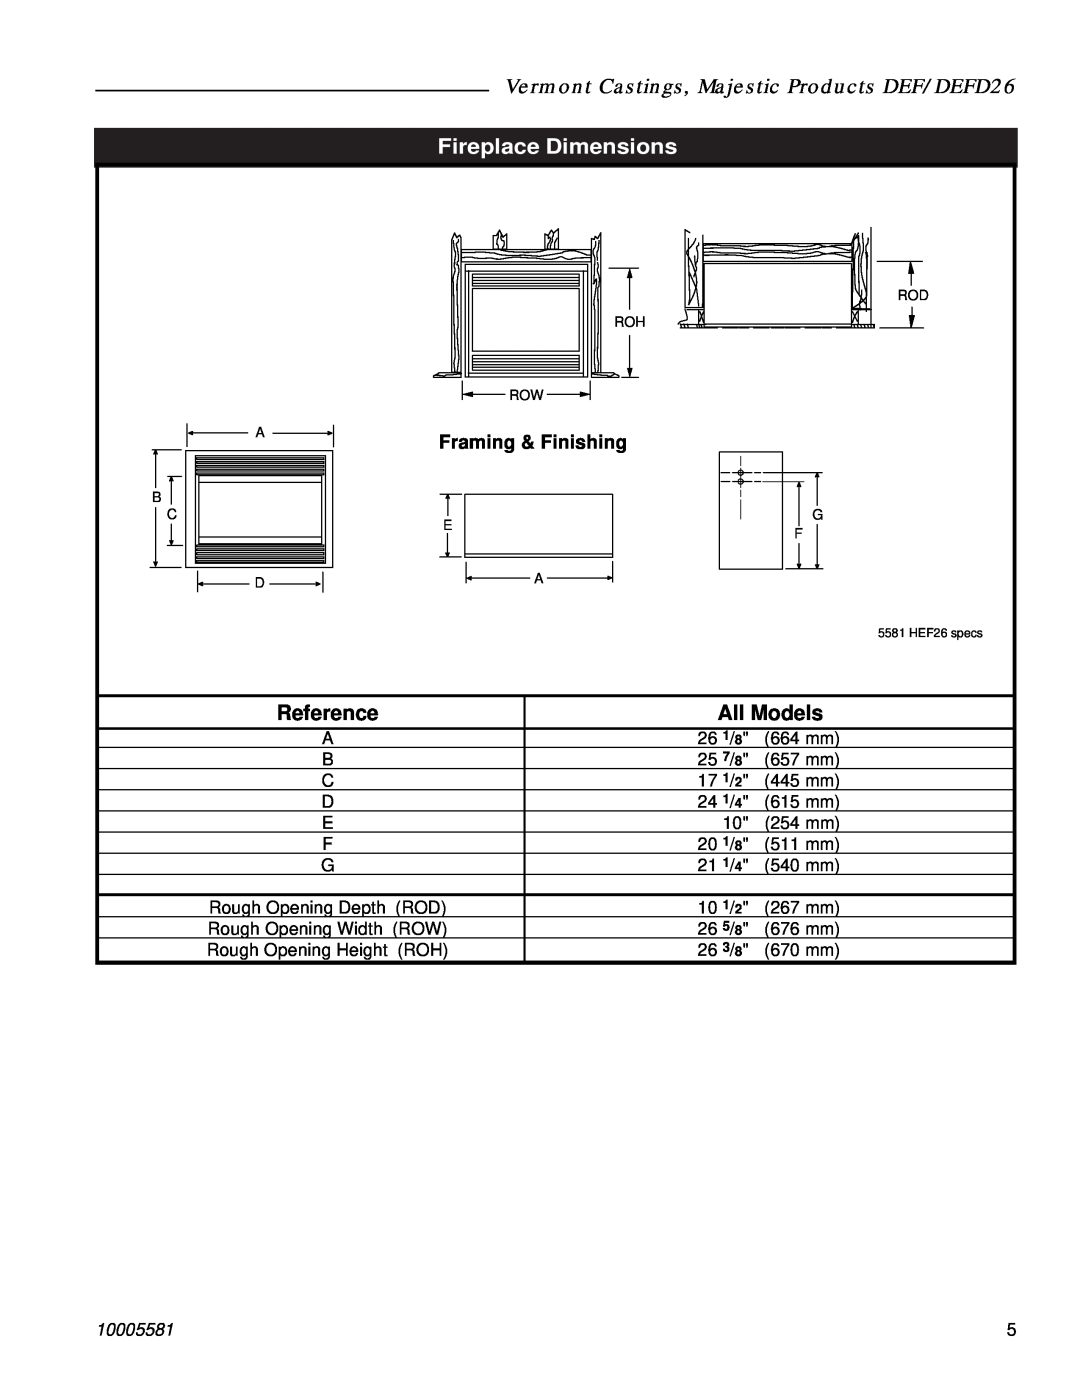 Vermont Casting Vermont Castings, Majestic Products DEF/DEFD26, Fireplace Dimensions, Framing & Finishing, 10005581 